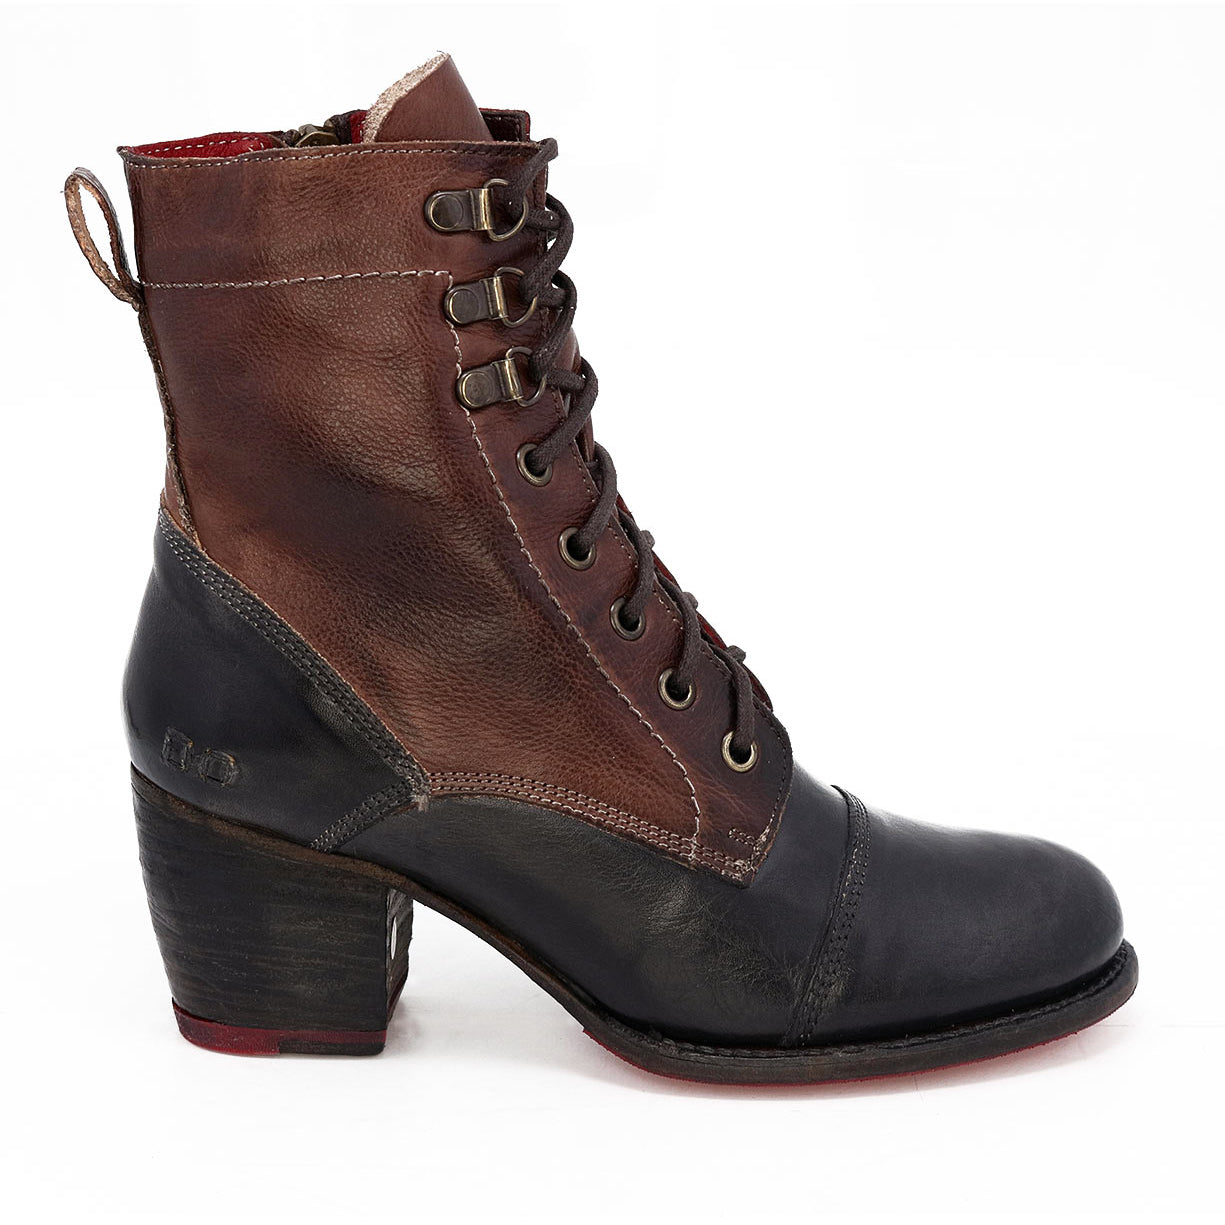 A women's Judgement boot by Bed Stu with a lace up.